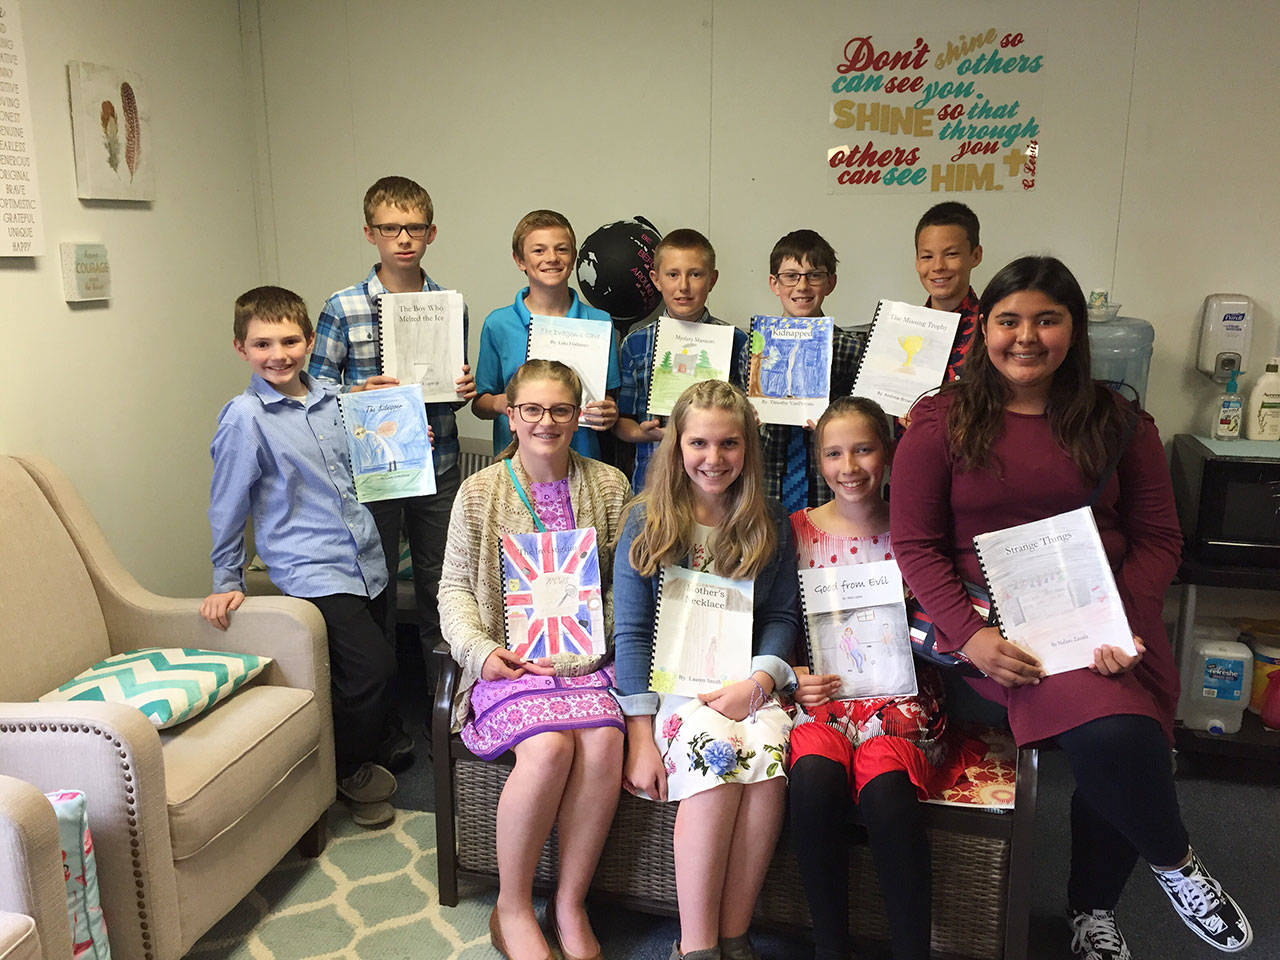 Students at Olympic Christian School sixth-graders celebrate their writings at the school’s recent Young Authors festival. Pictured are (back row, from left) Liam Critchlow, Caleb Lagrange, Luke Flodstrom, Caleb Crawford, Timothy VanProyen and Andrew Brown, with (front row, from left) Sammy Smith, Lauren Smith, Abby Jones and Nalani Zavala. Submitted photo